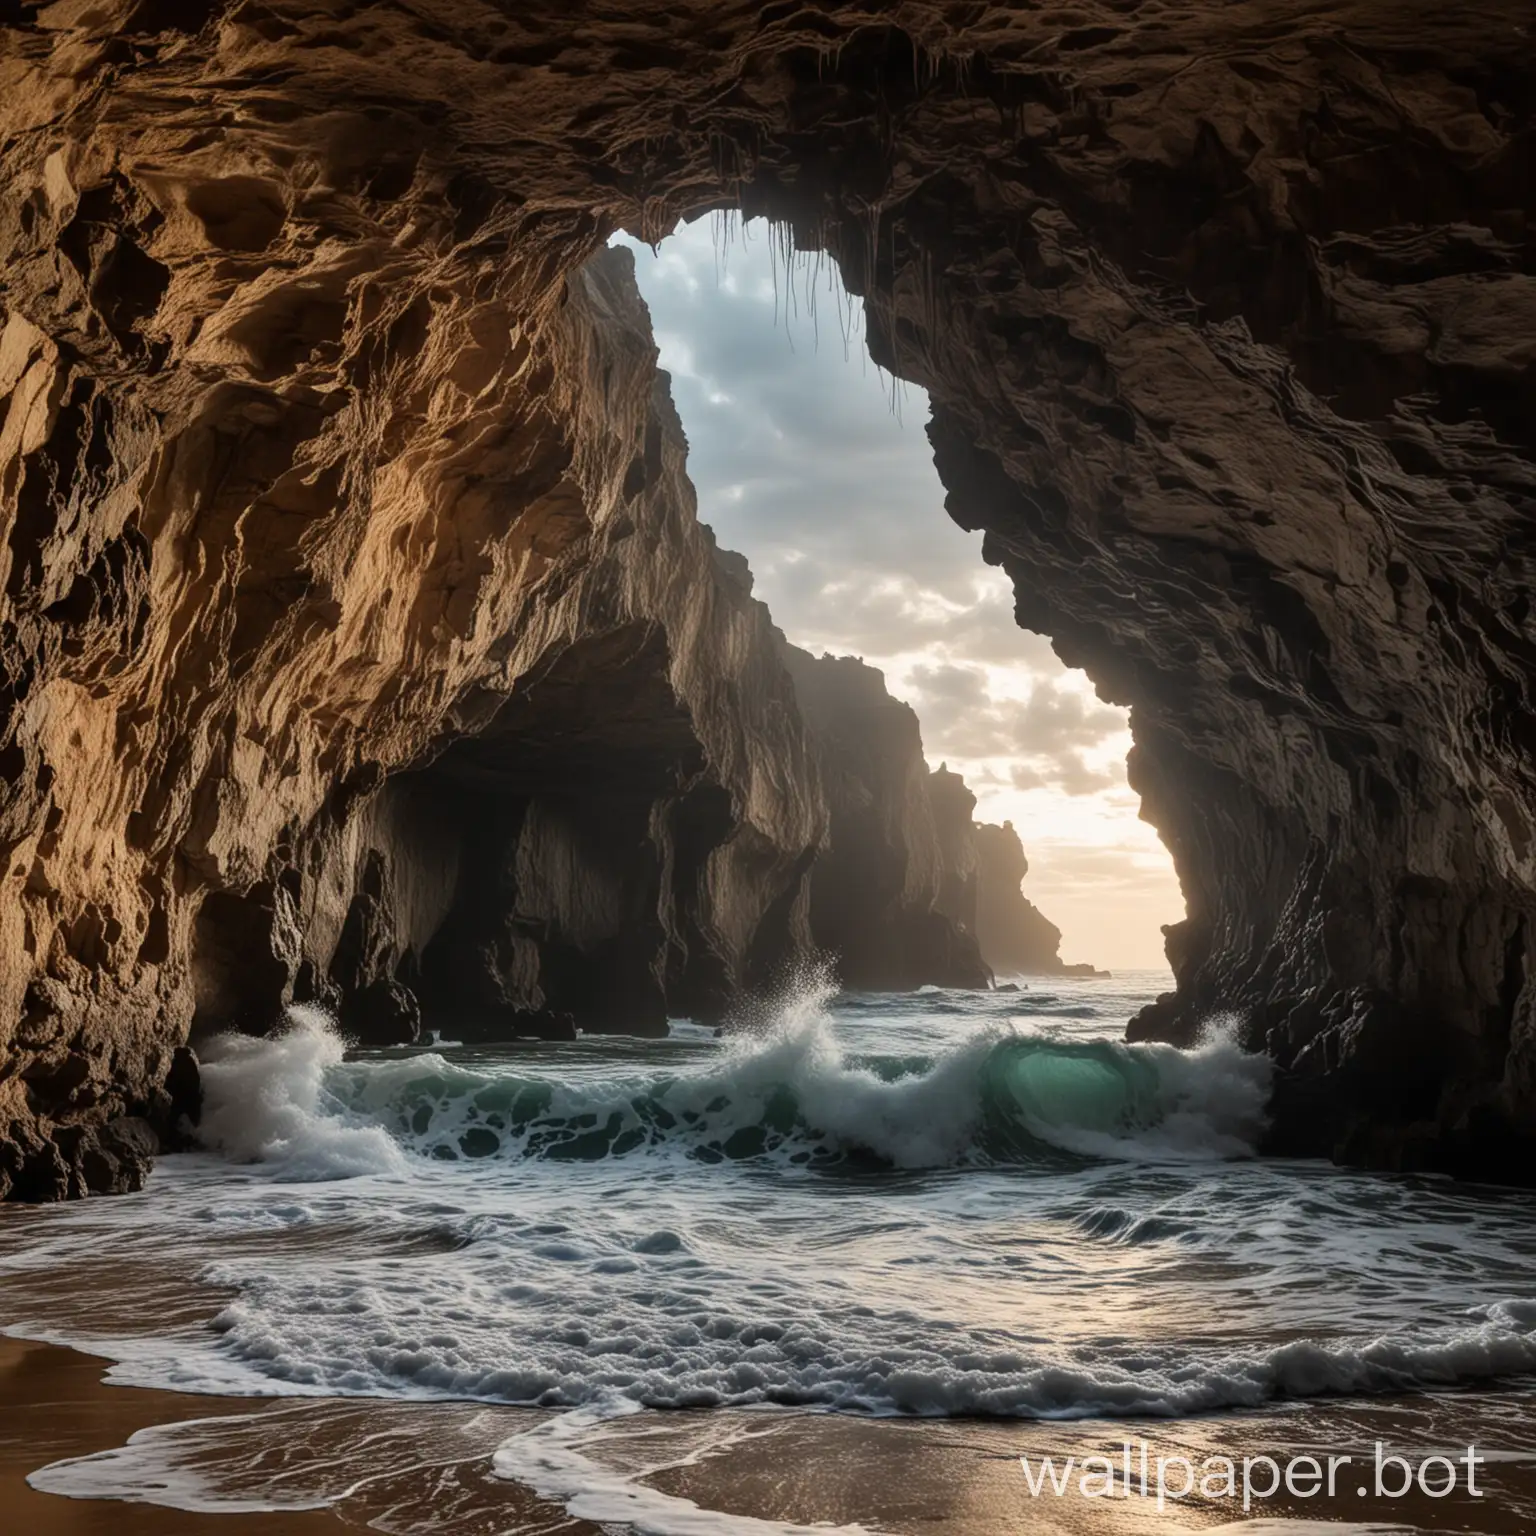 An empty cave with the echo of waves flowing in it